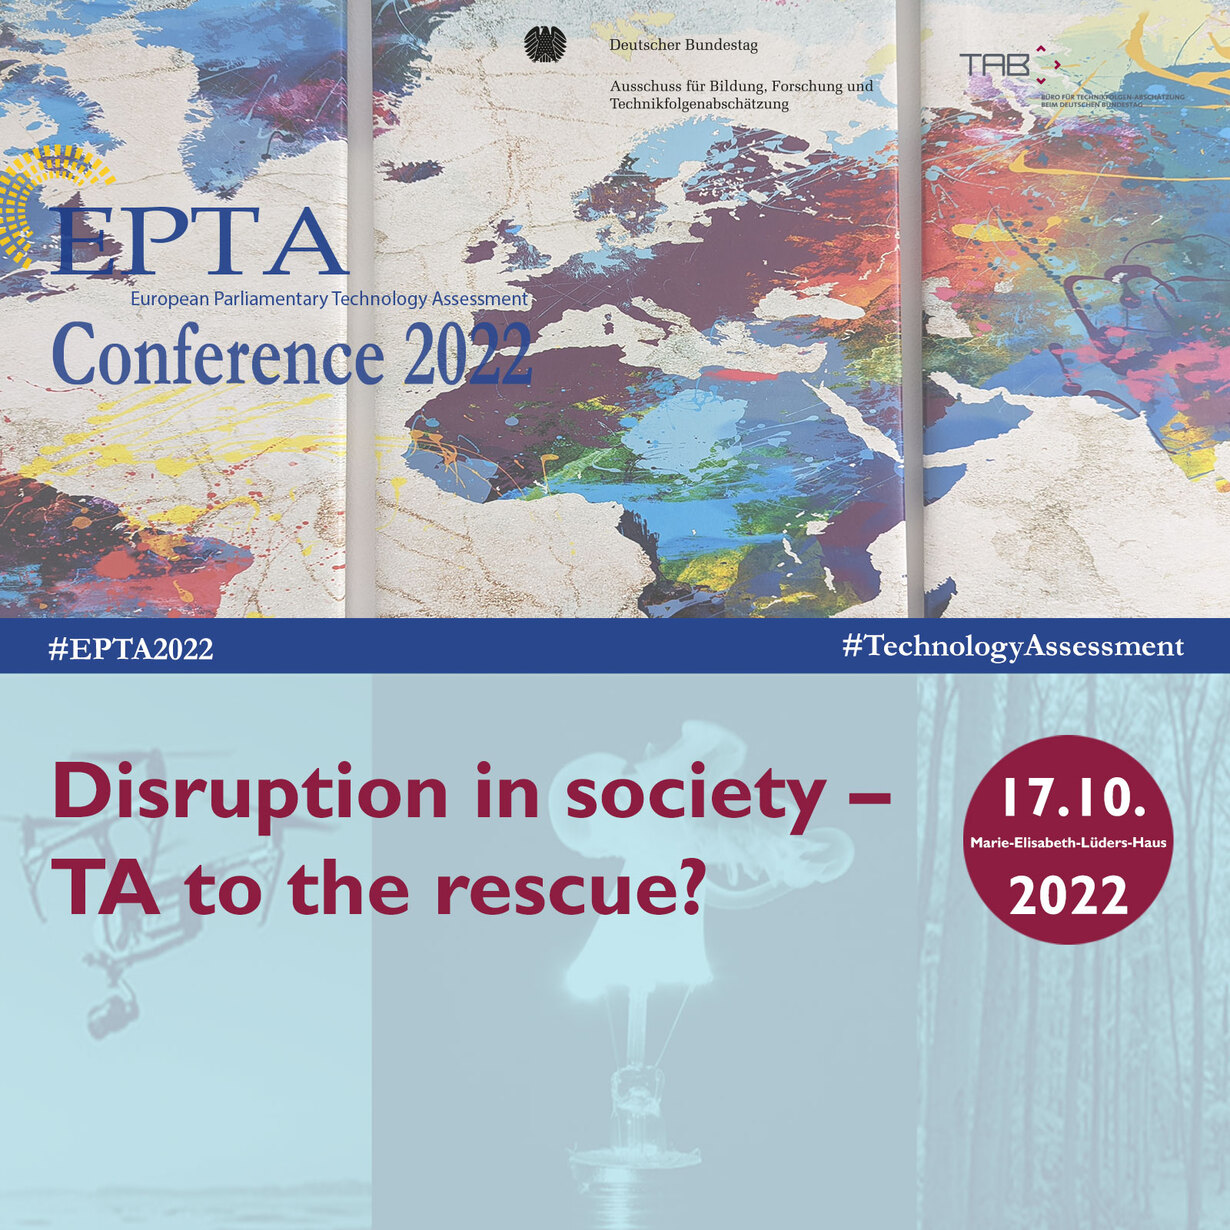 Hintergrundbild: Plakat EPTA-Konferenz "Disruption in society - TA to the rescue" with a colorfull worldmap epta-logo bundestaglogo and symbolic pictures of projects aws - forrests - critis